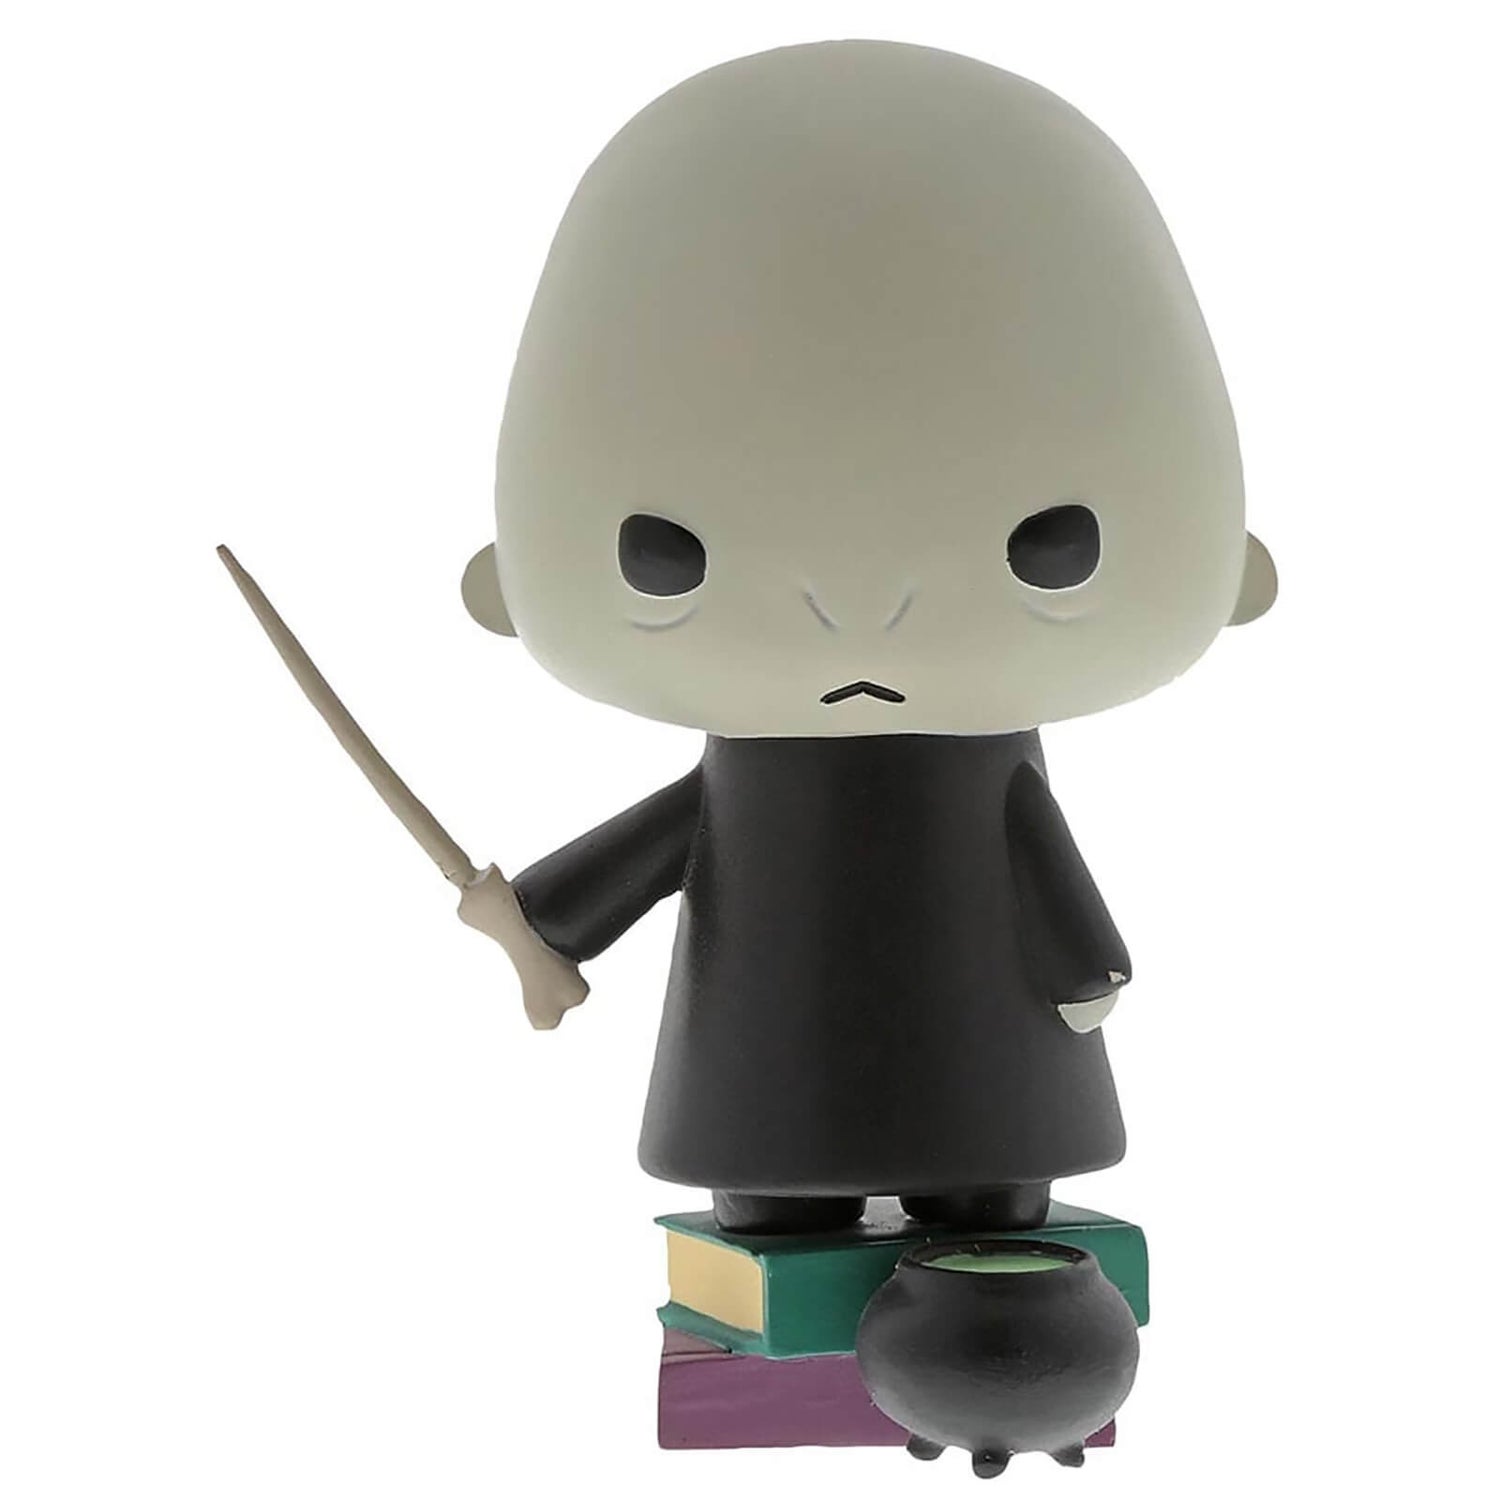 The Wizarding World of Harry Potter Chibi Style Voldemort 8.0cm